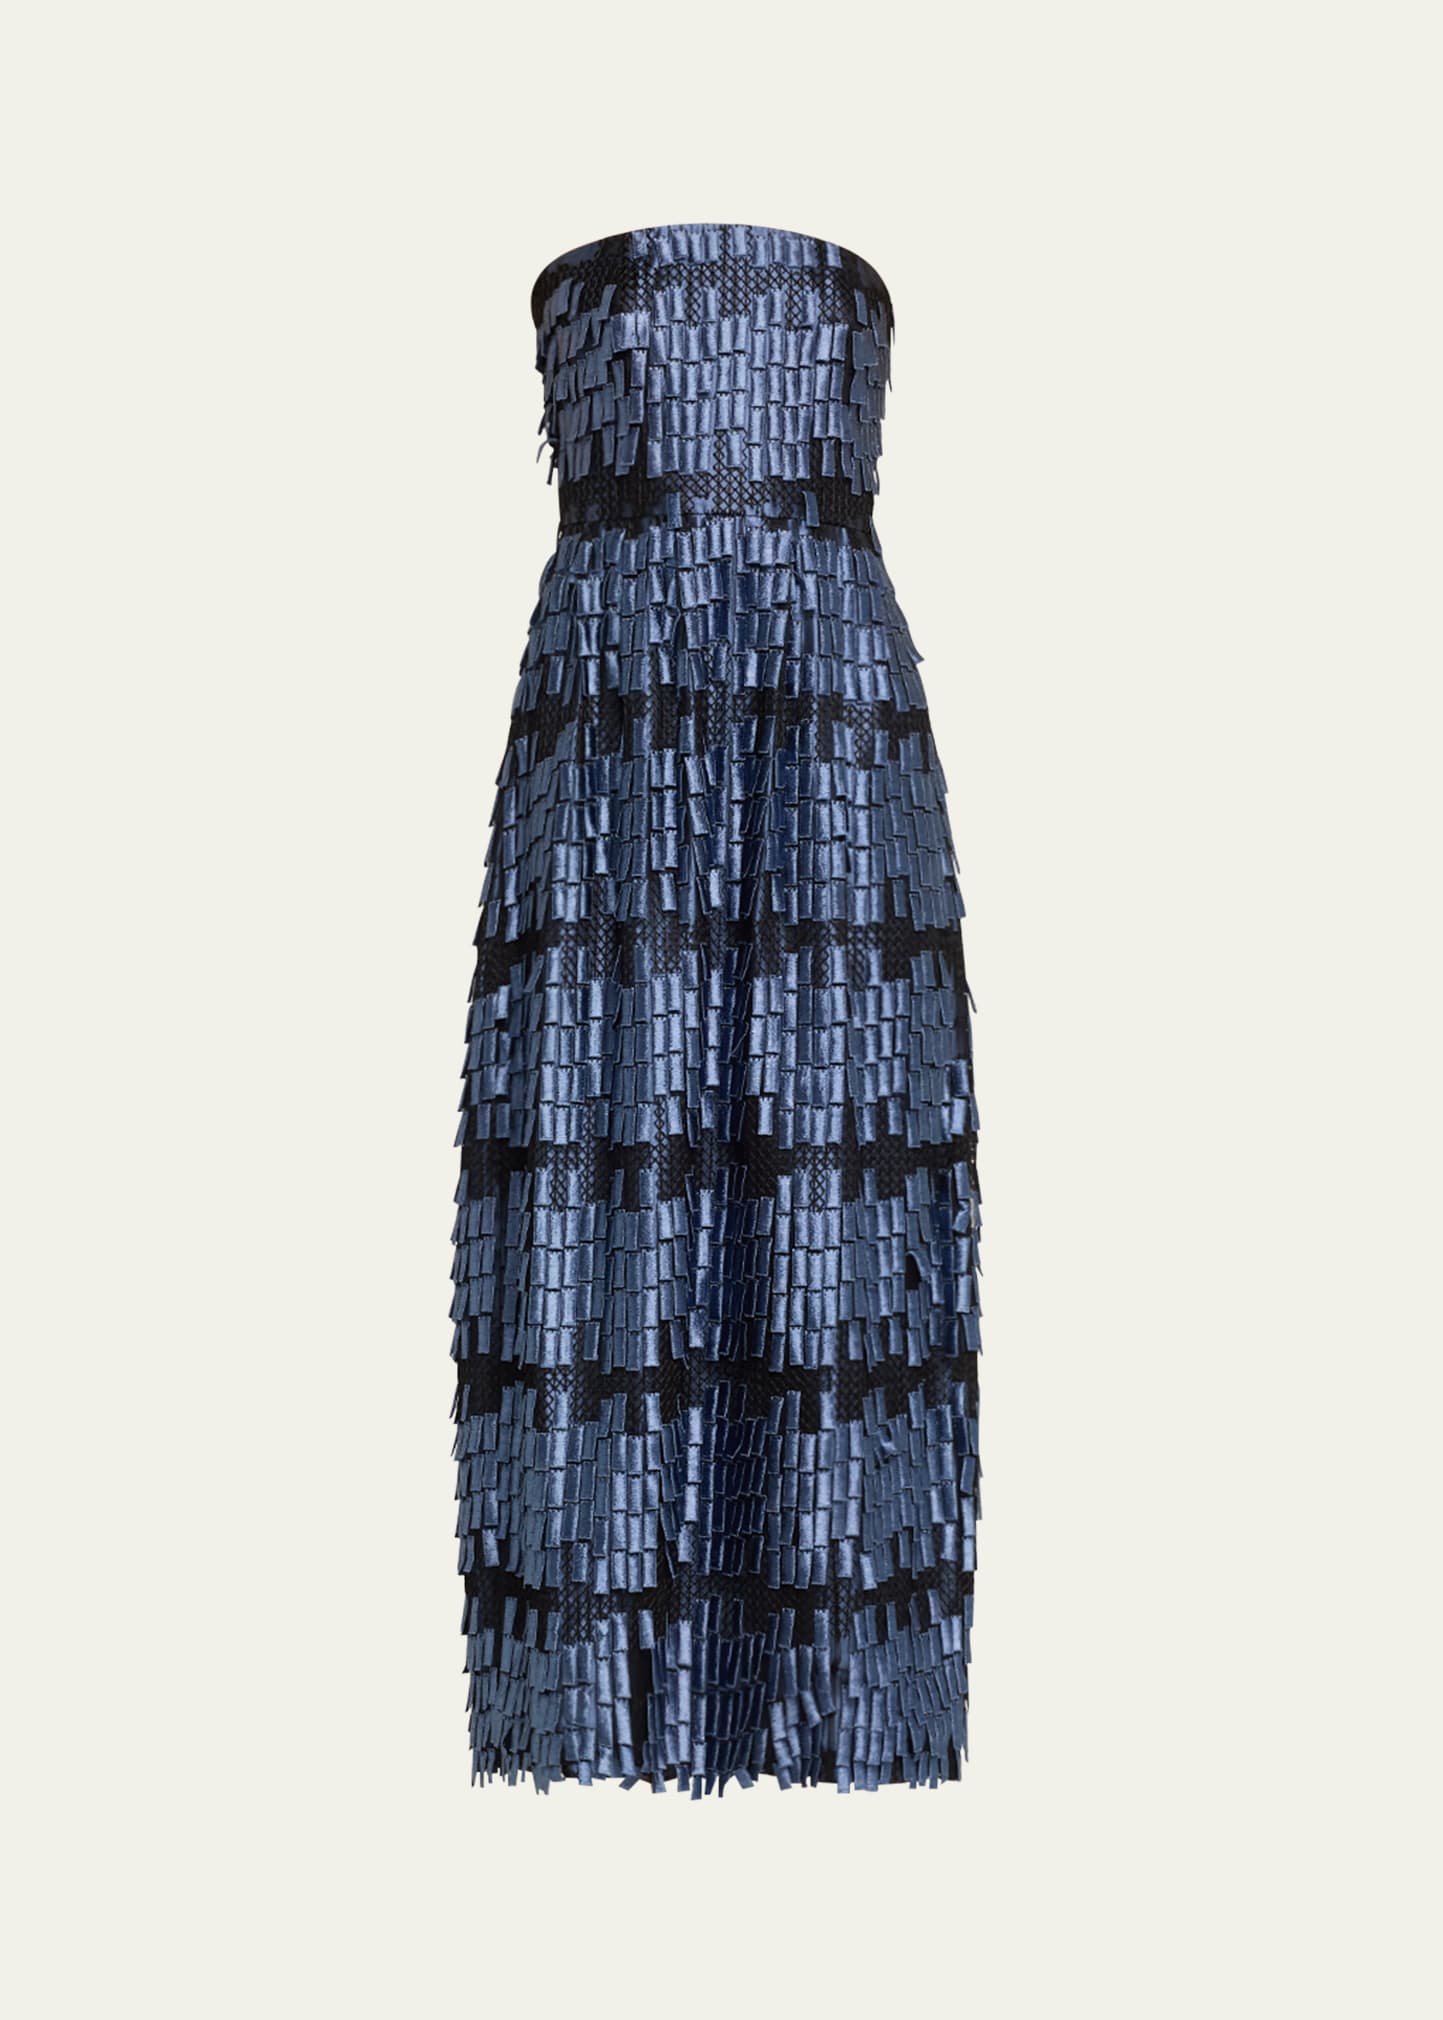 Strapless Geometric Fringe Effect Gown